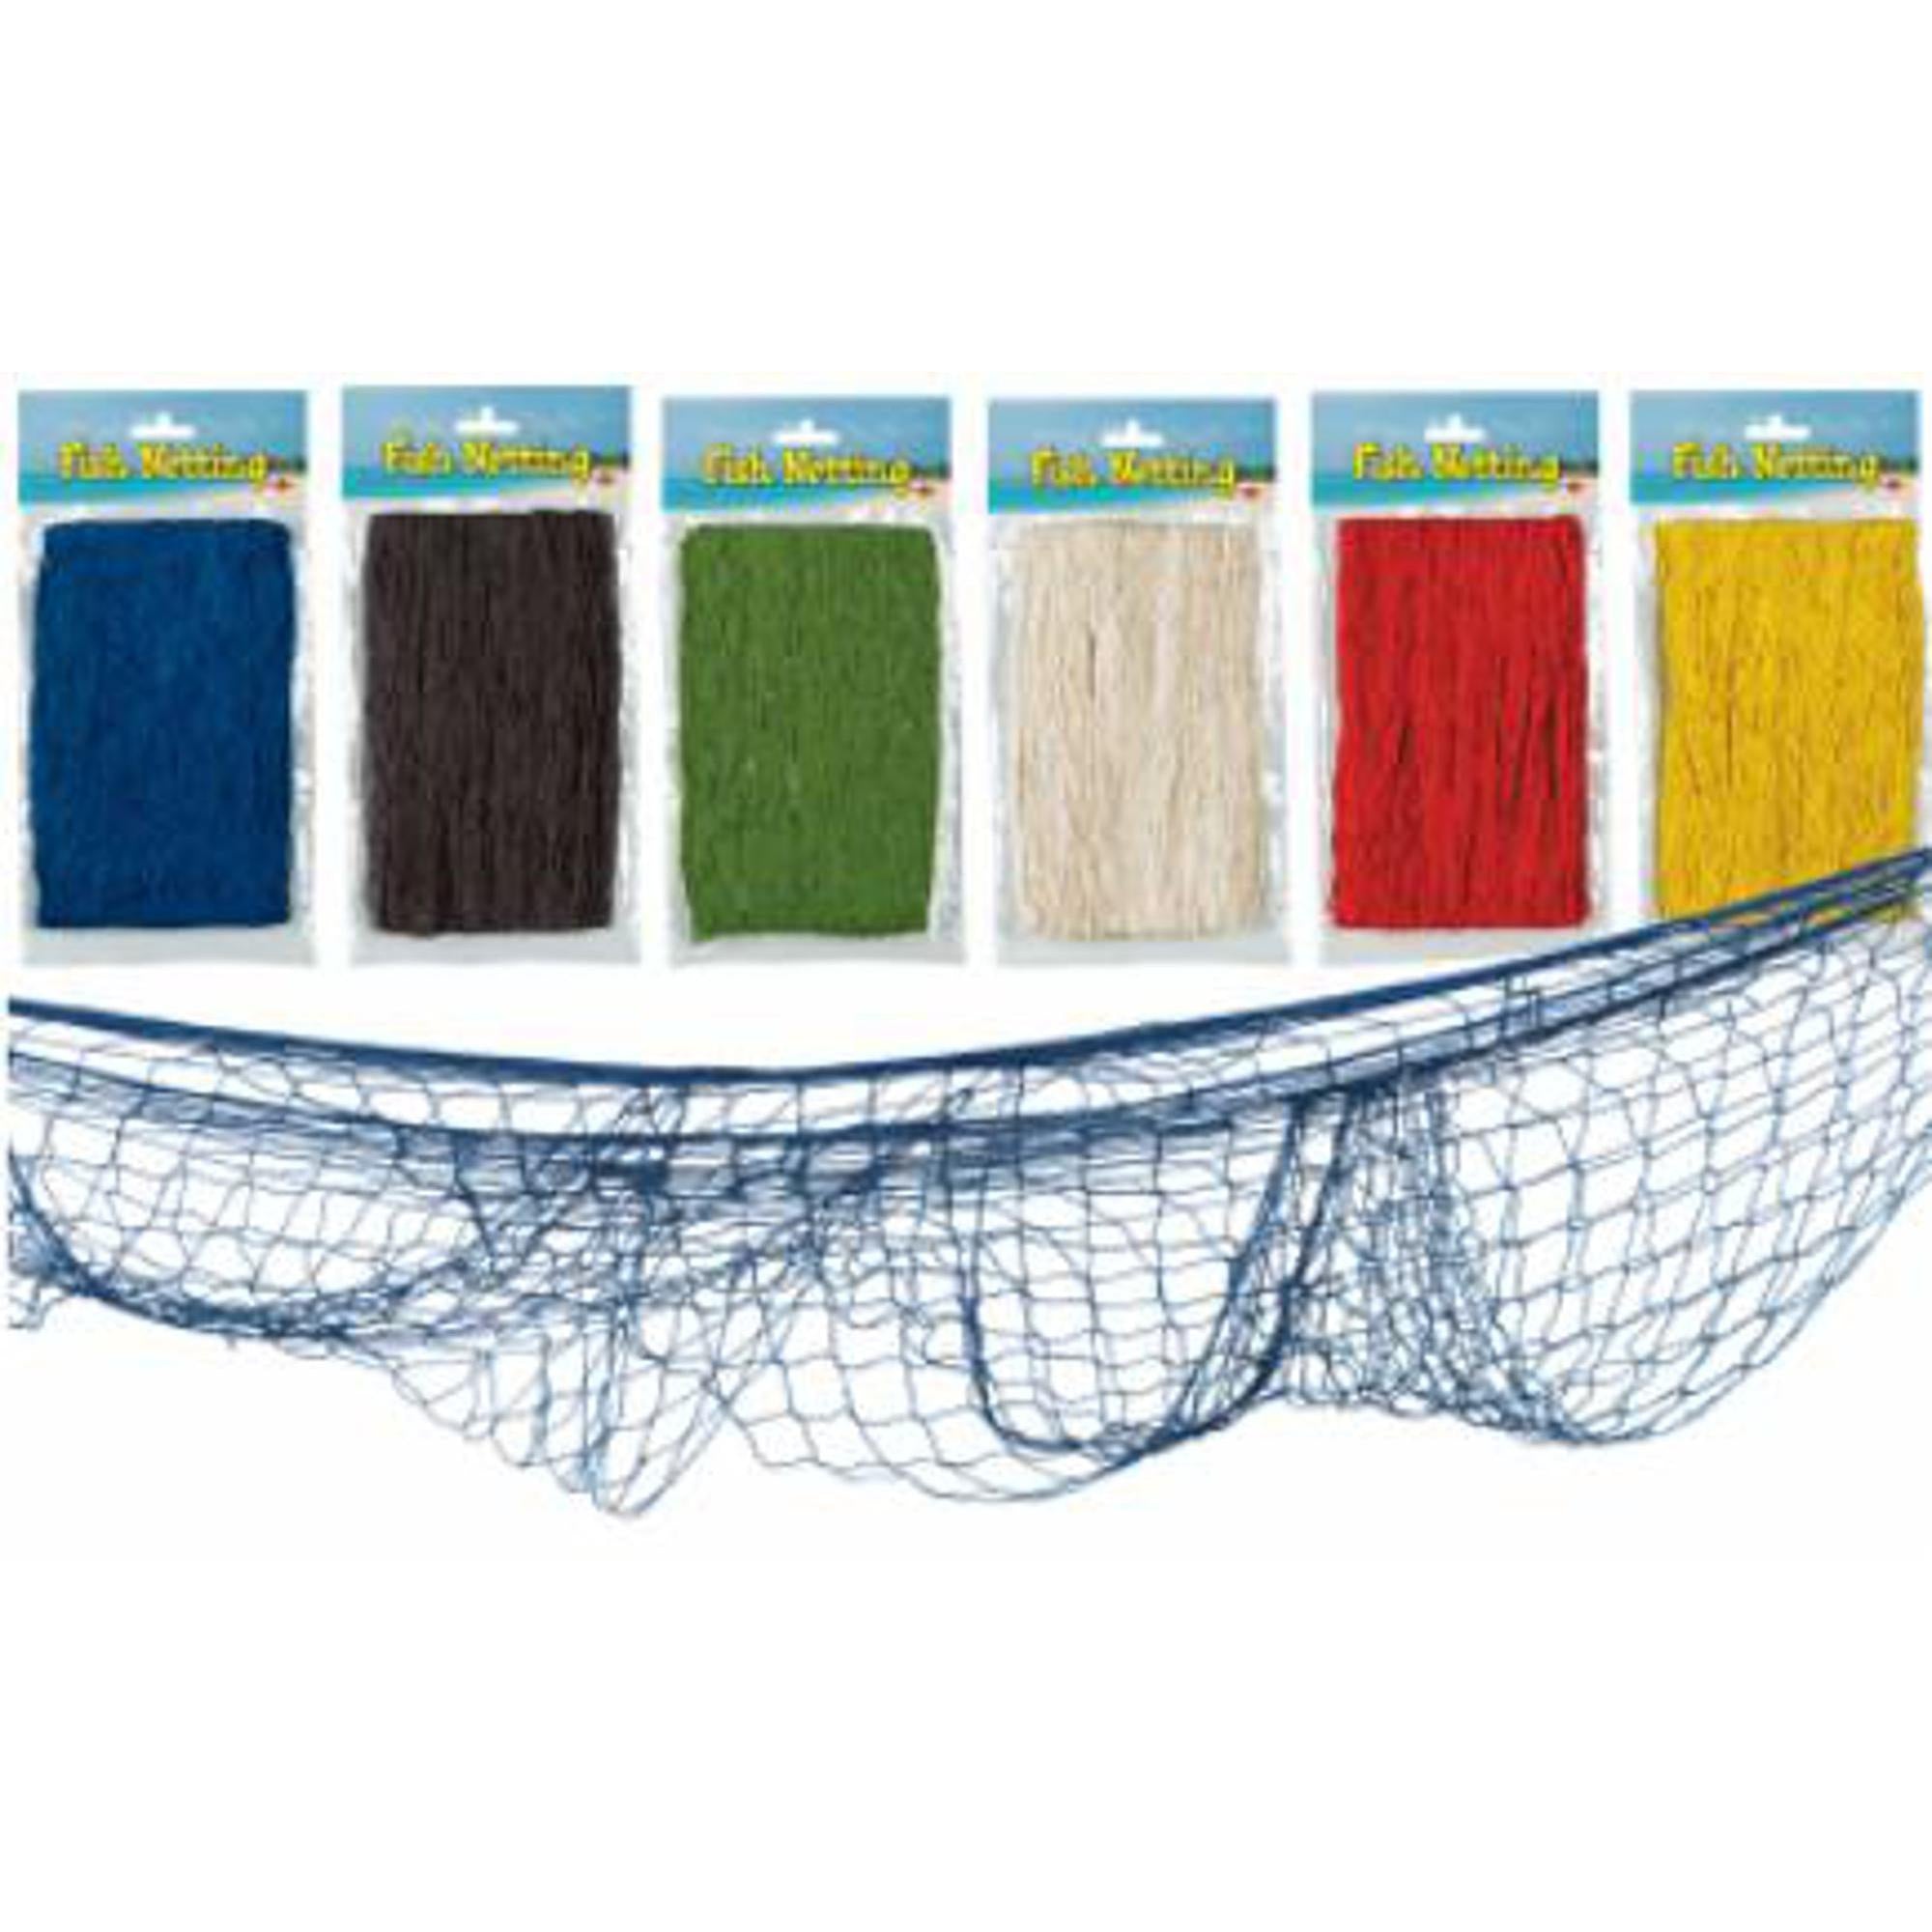 Fish Netting Set - 4' X 12' - 1 Package